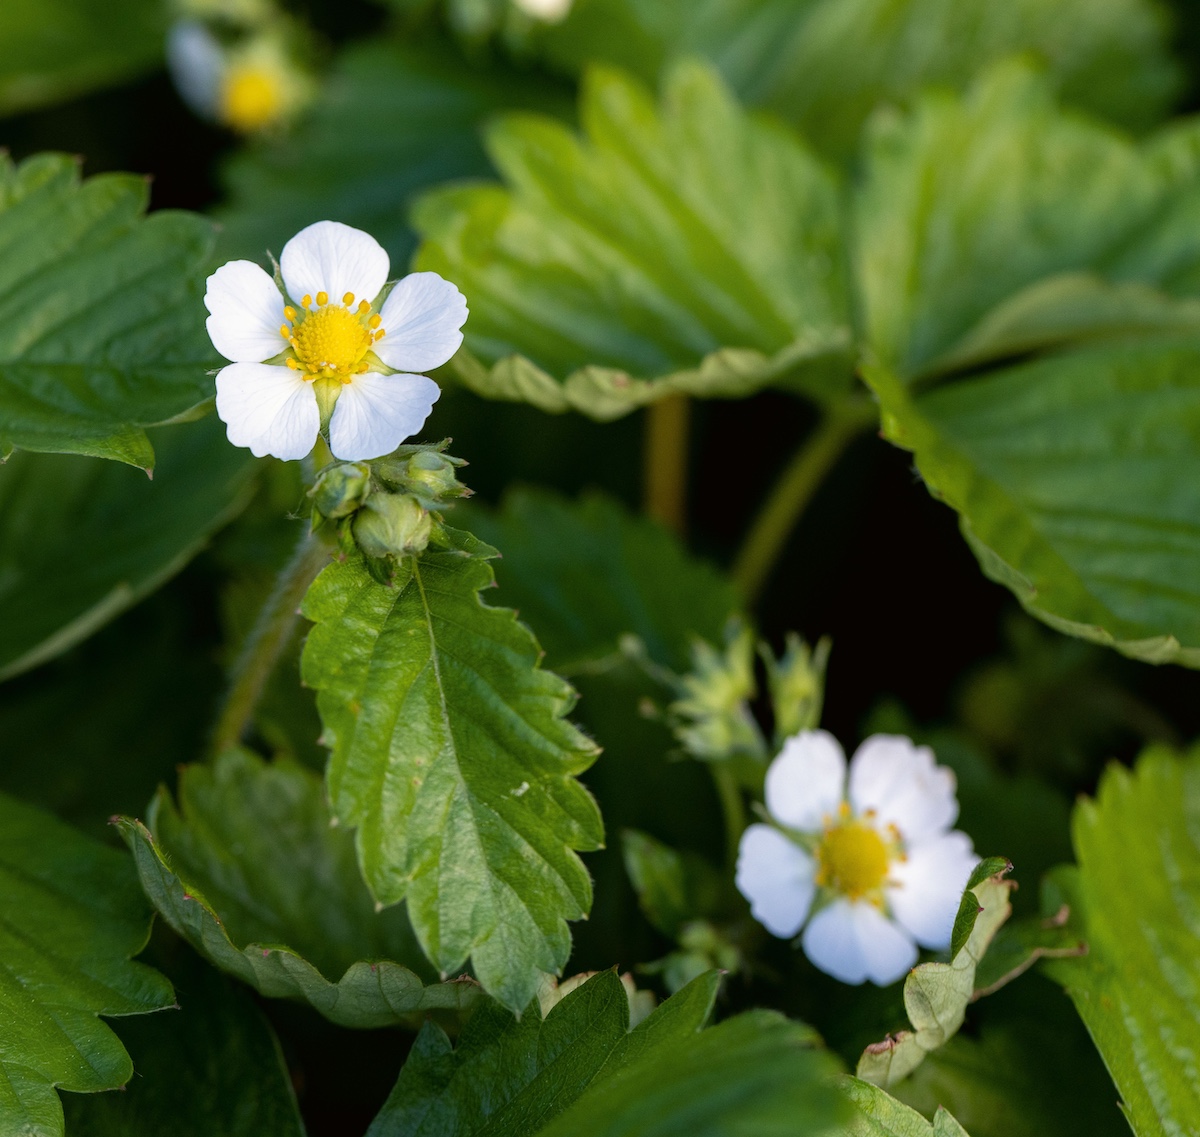 Green strawberry leaves bloom with small white flower buds.